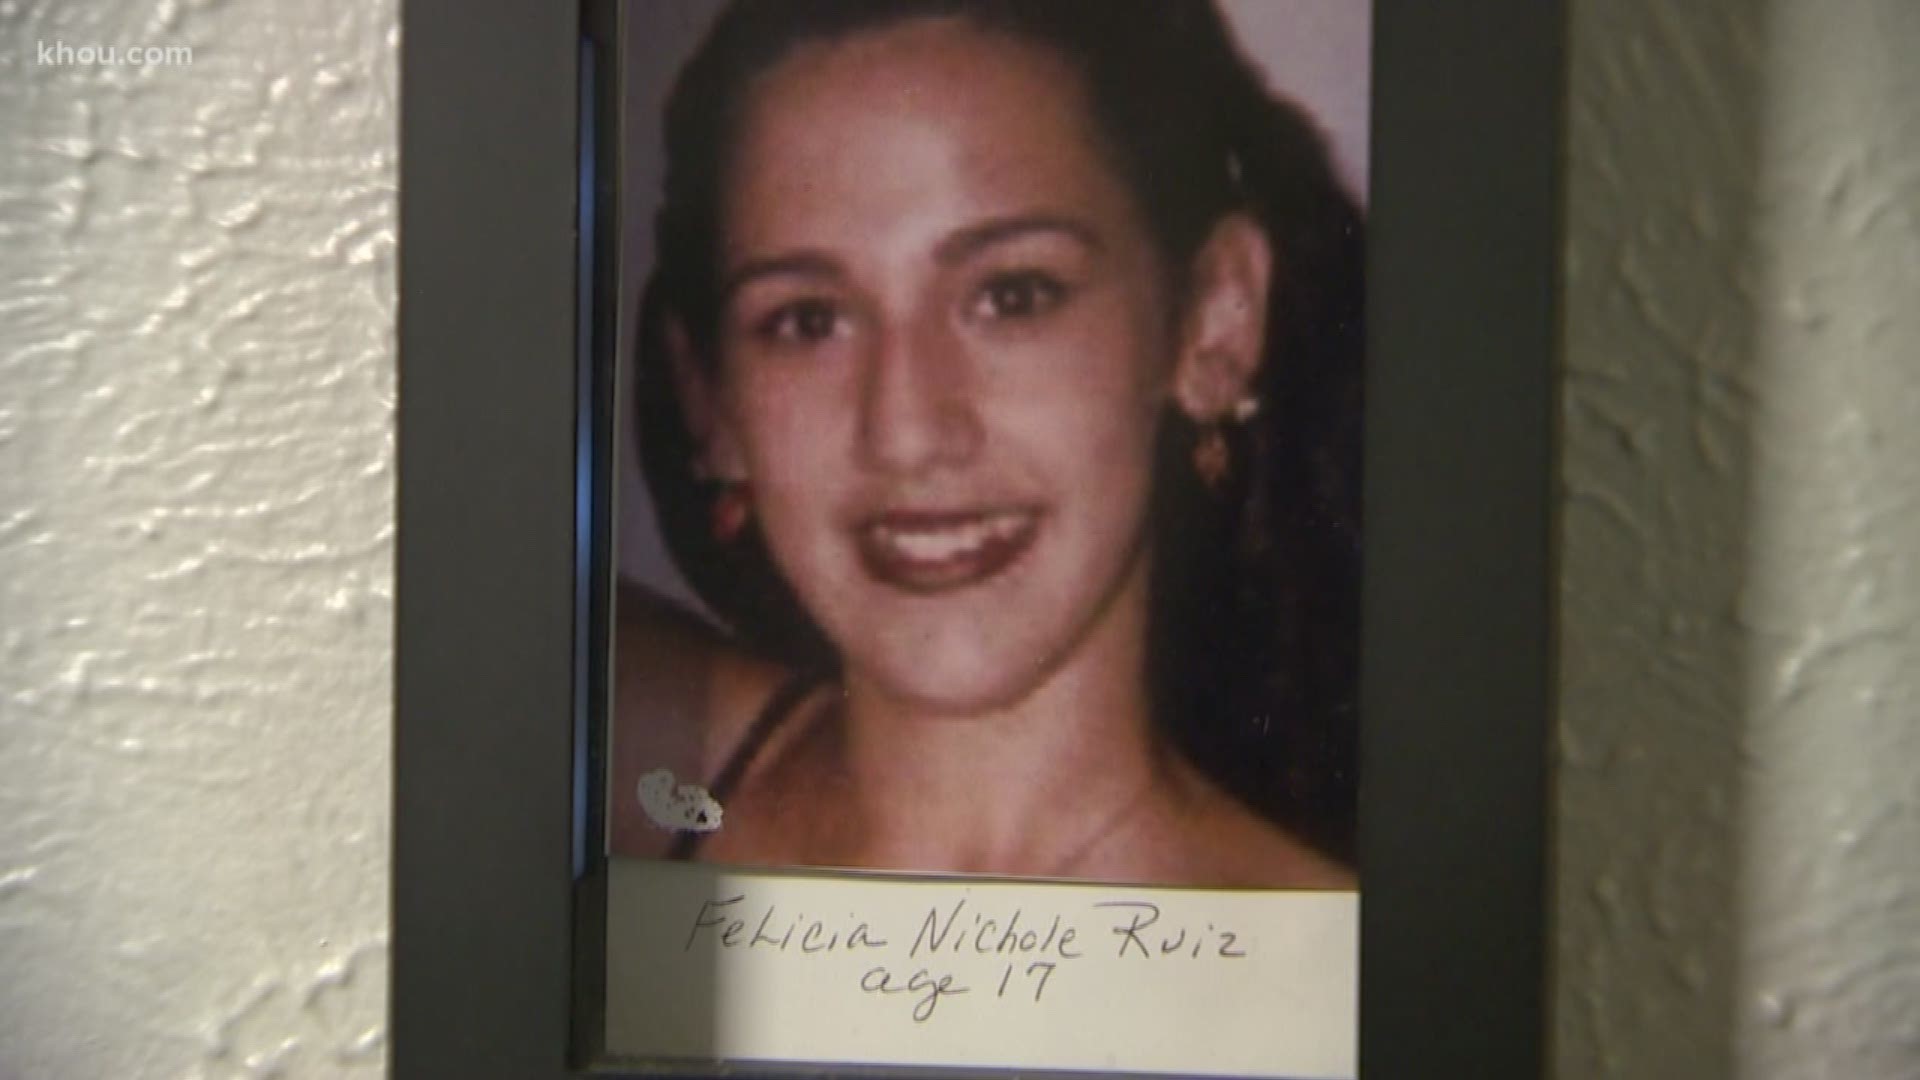 Twenty years ago, a teenage girl was lured to a fake Halloween party and murdered. Her parents are still demanding justice for their daughter.